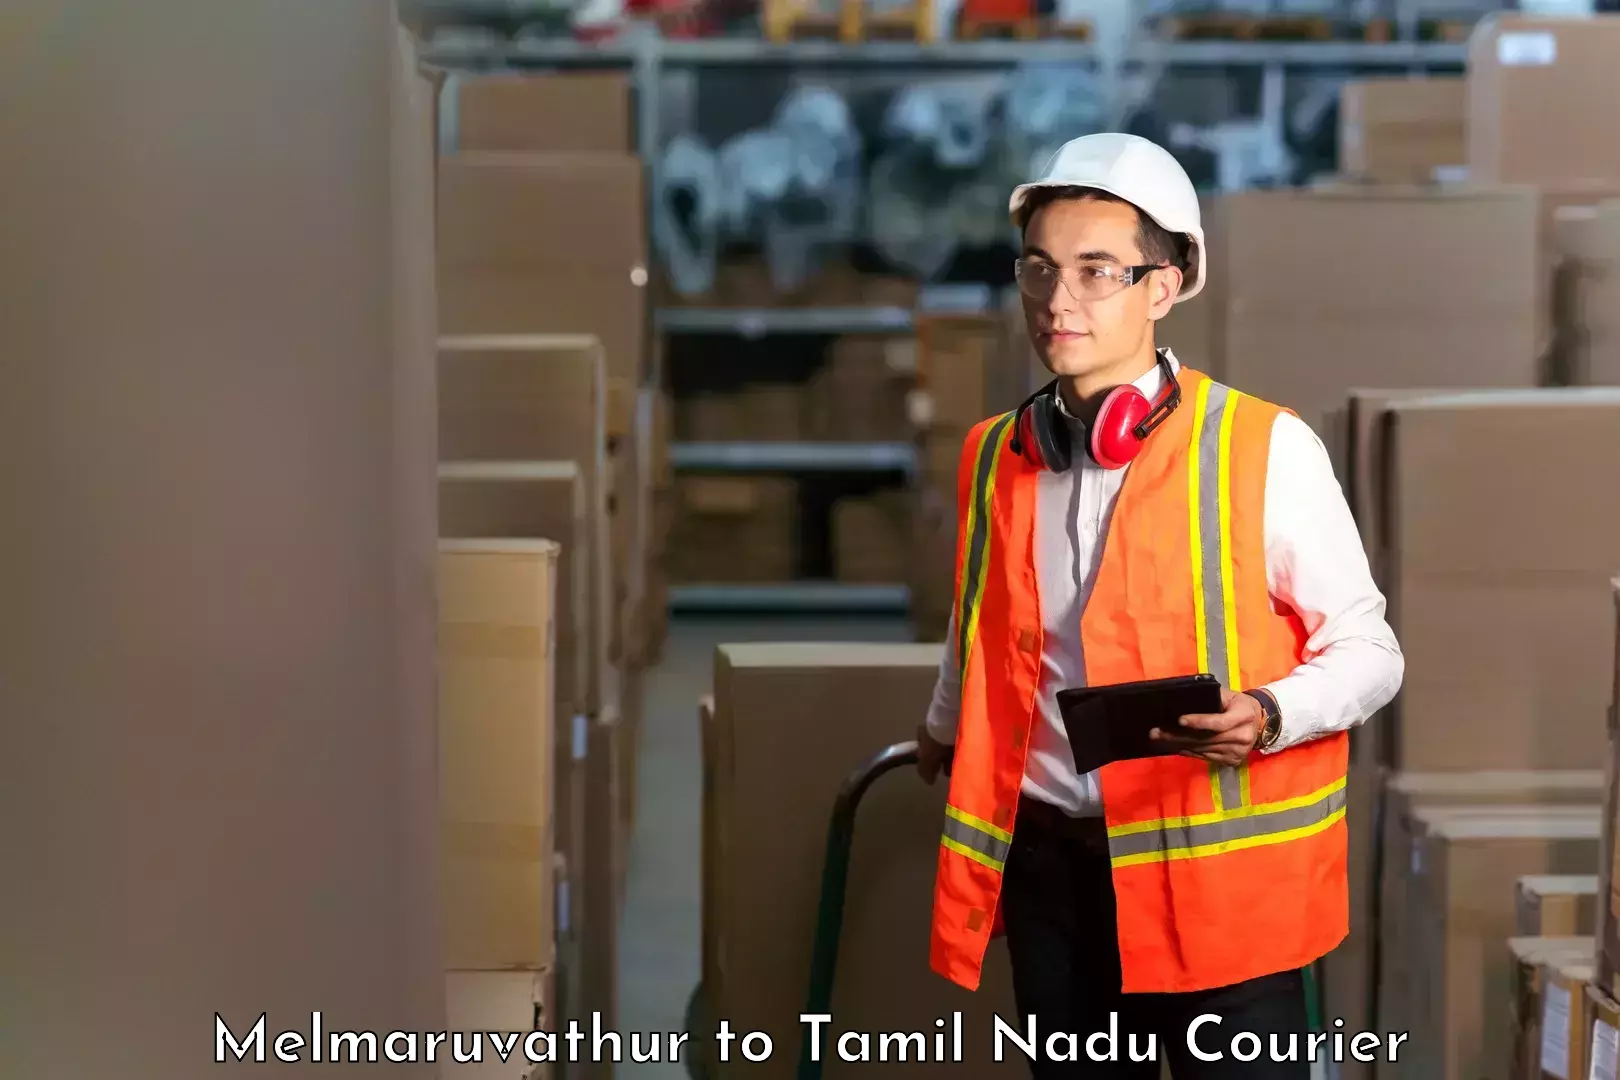 Courier service comparison in Melmaruvathur to Mayiladuthurai